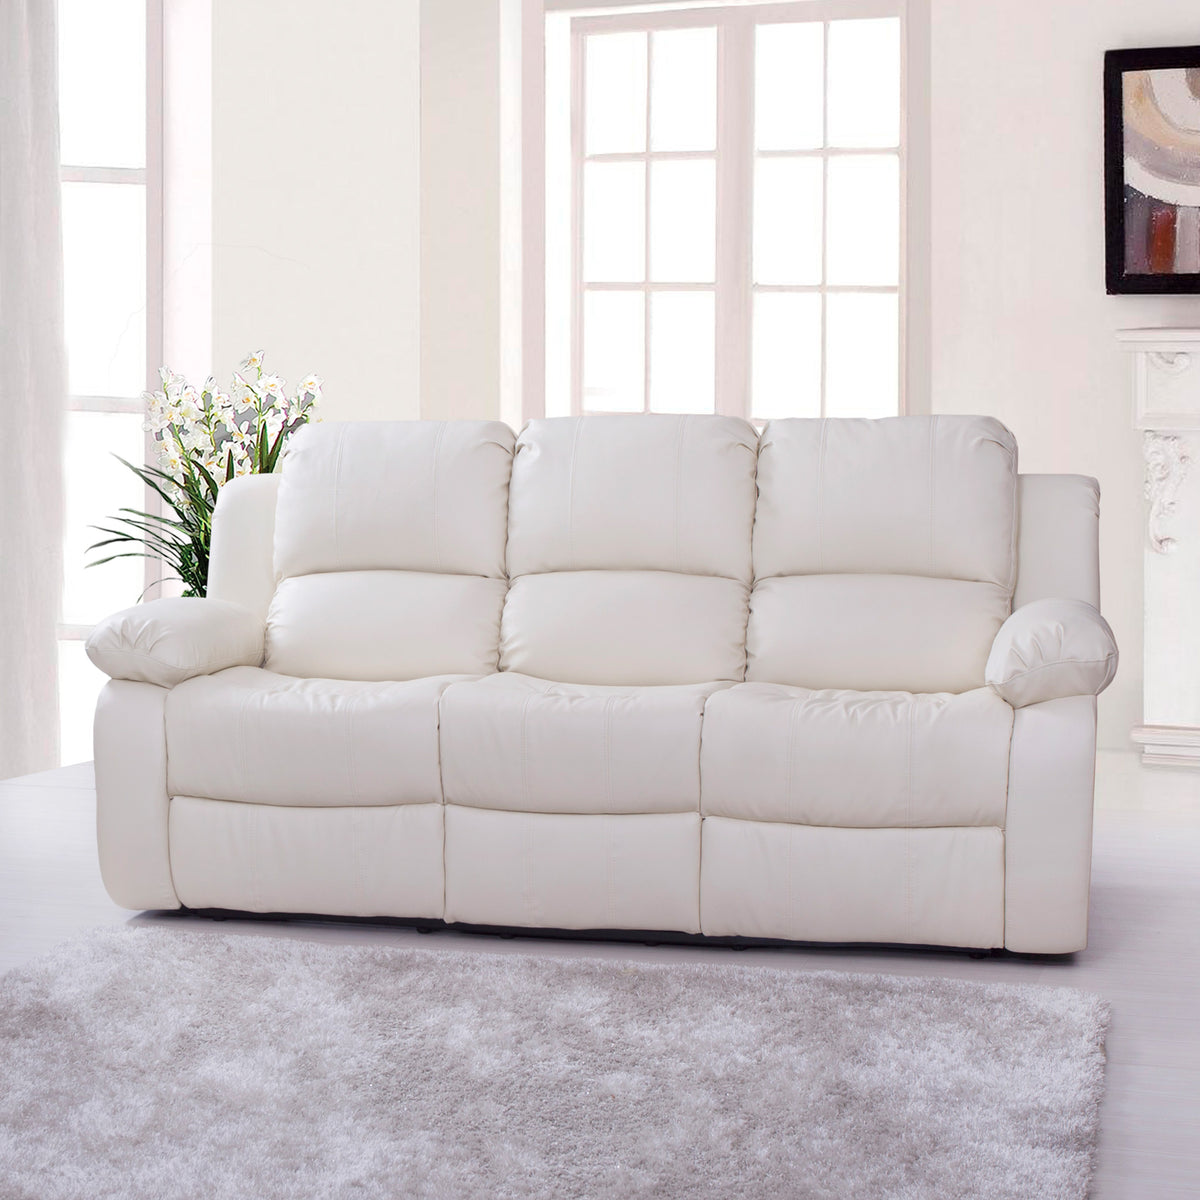 Valencia Cream 3 Seater Reclining Leather Sofa from Roseland Furniture